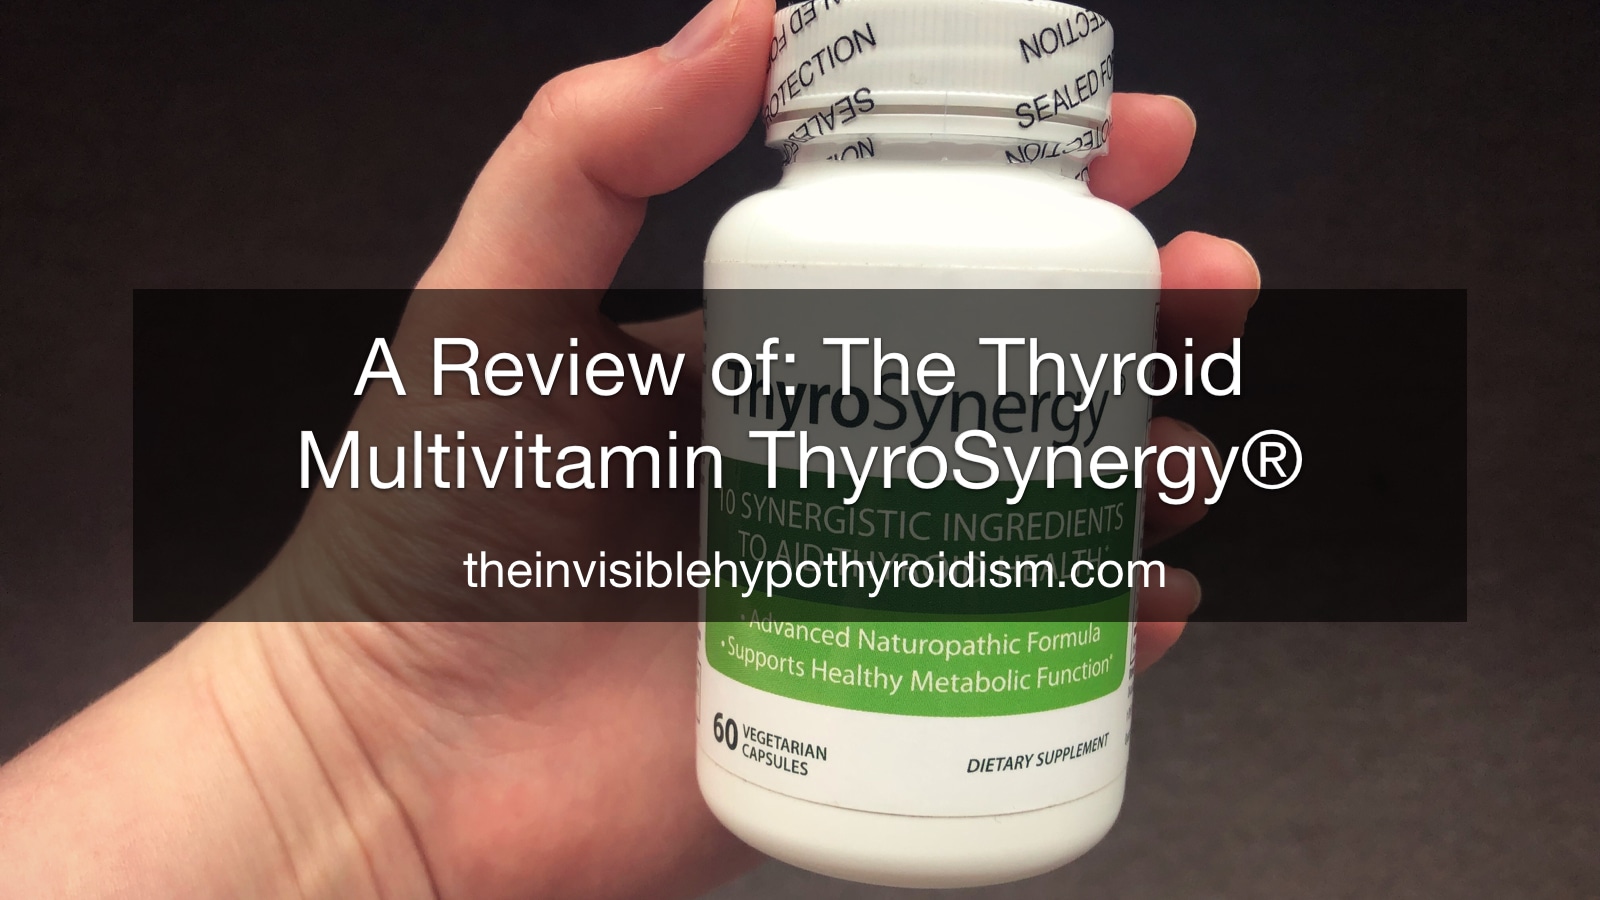 A Review of: The Thyroid Multivitamin ThyroSynergy®